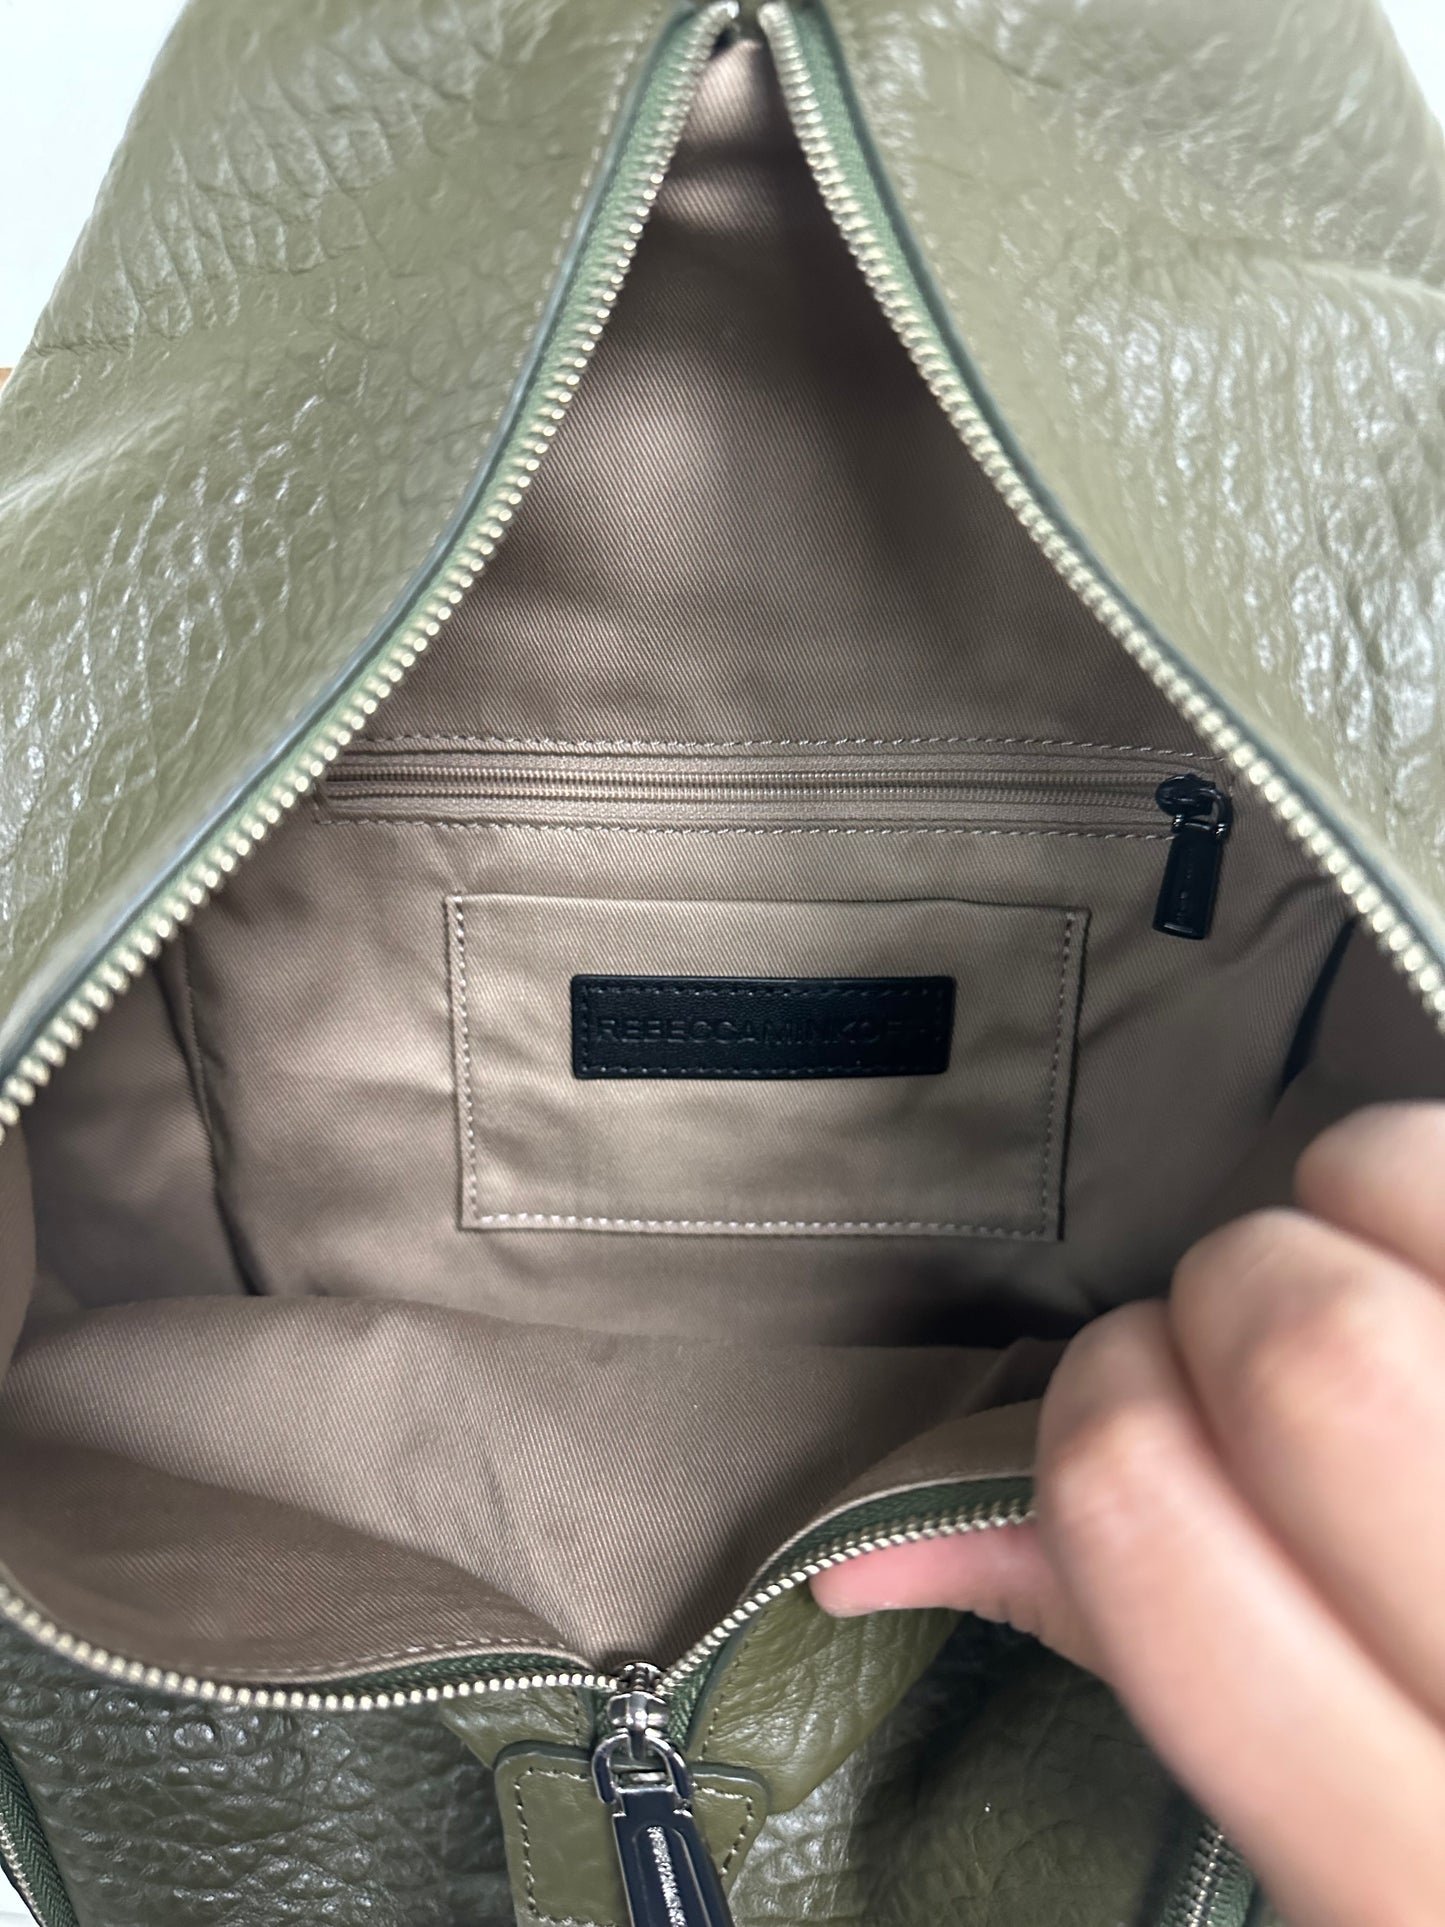 Backpack Leather By Rebecca Minkoff  Size: Medium